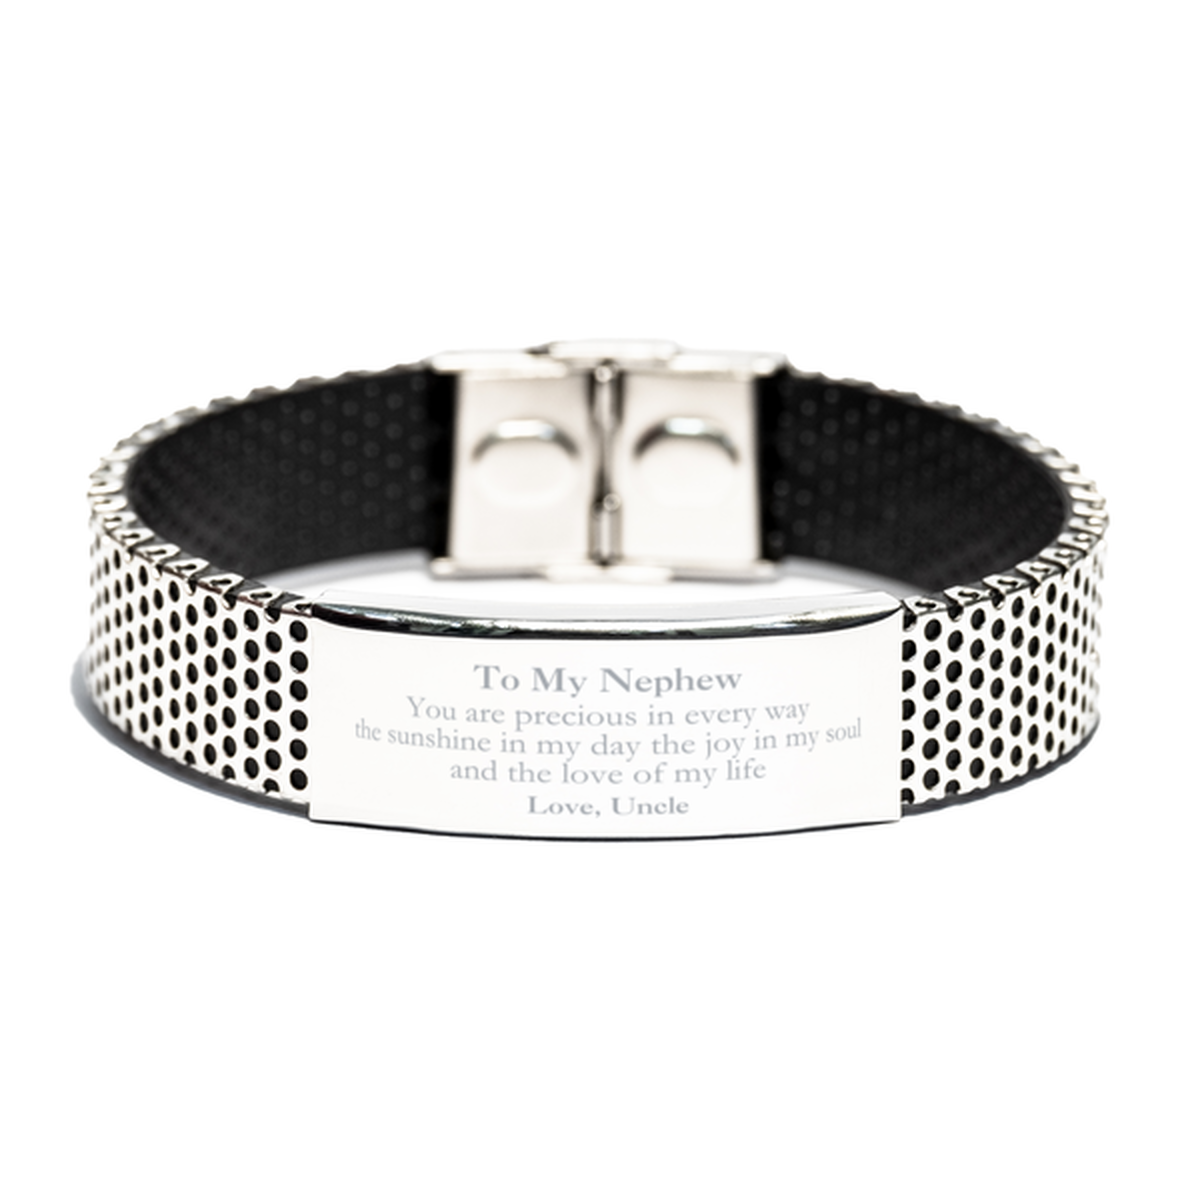 Graduation Gifts for Nephew Stainless Steel Bracelet Present from Uncle, Christmas Nephew Birthday Gifts Nephew You are precious in every way the sunshine in my day. Love, Uncle